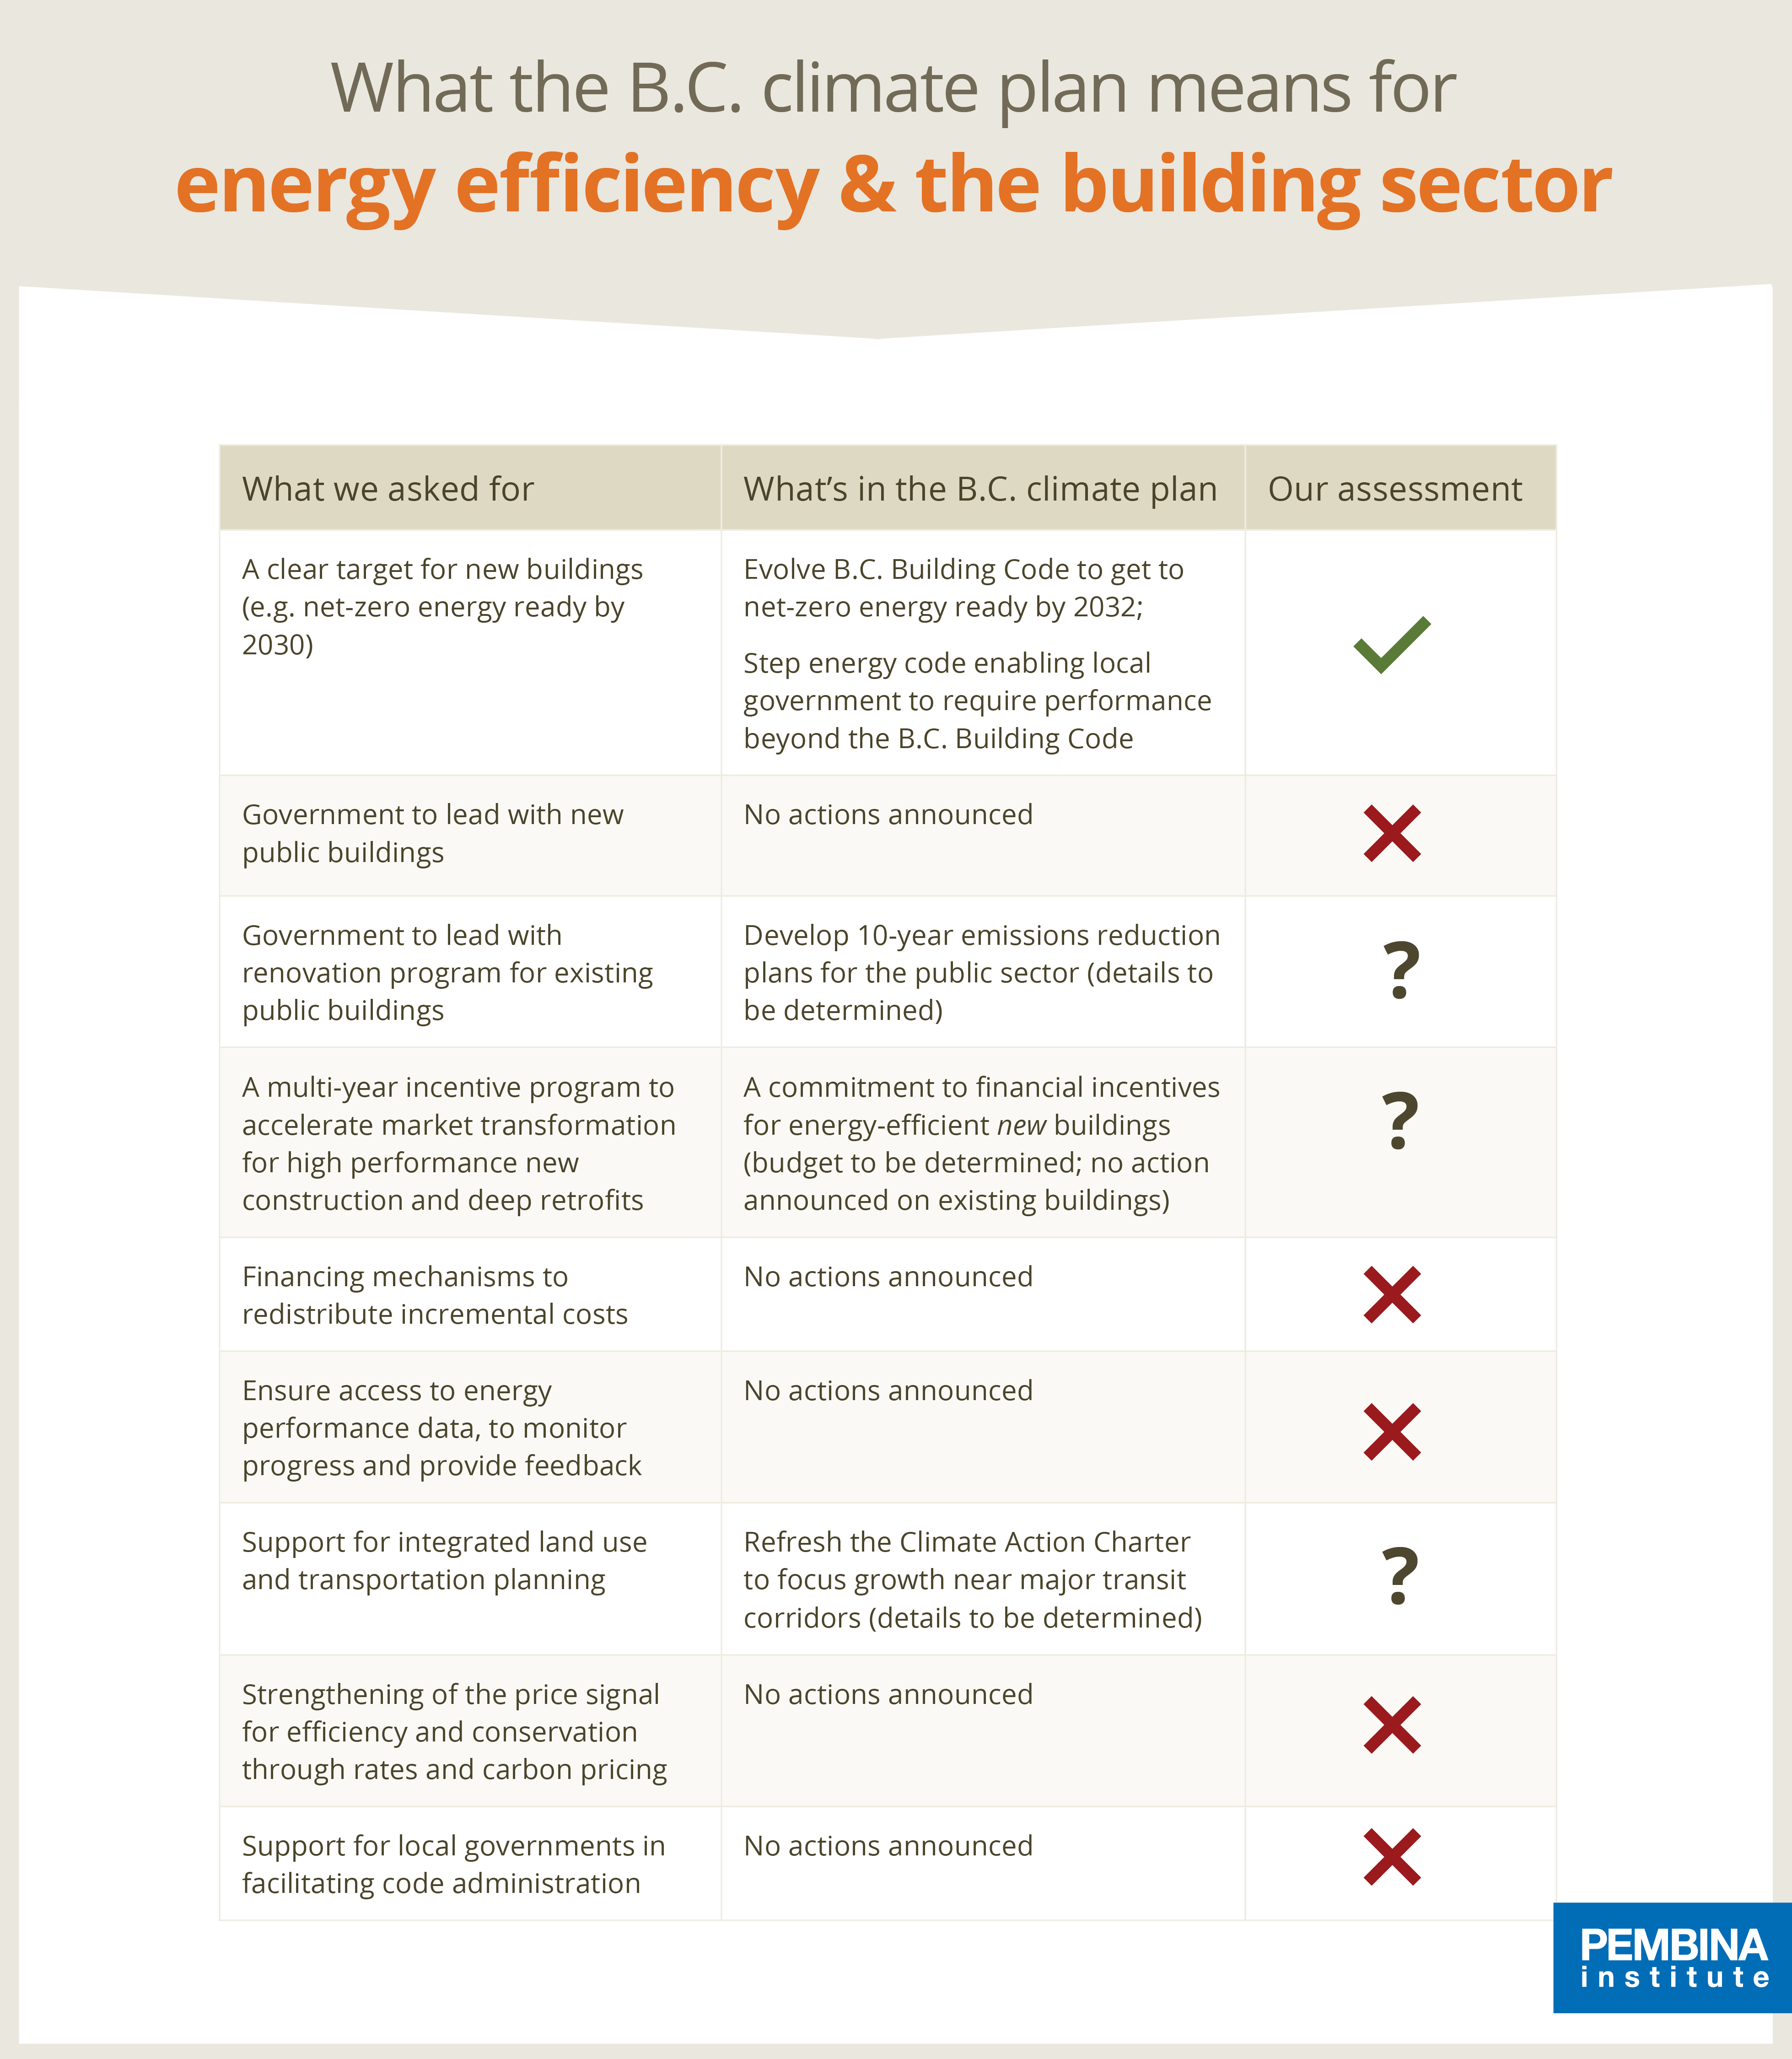 What the B.C. climate plan means for energy efficiency and the building sector